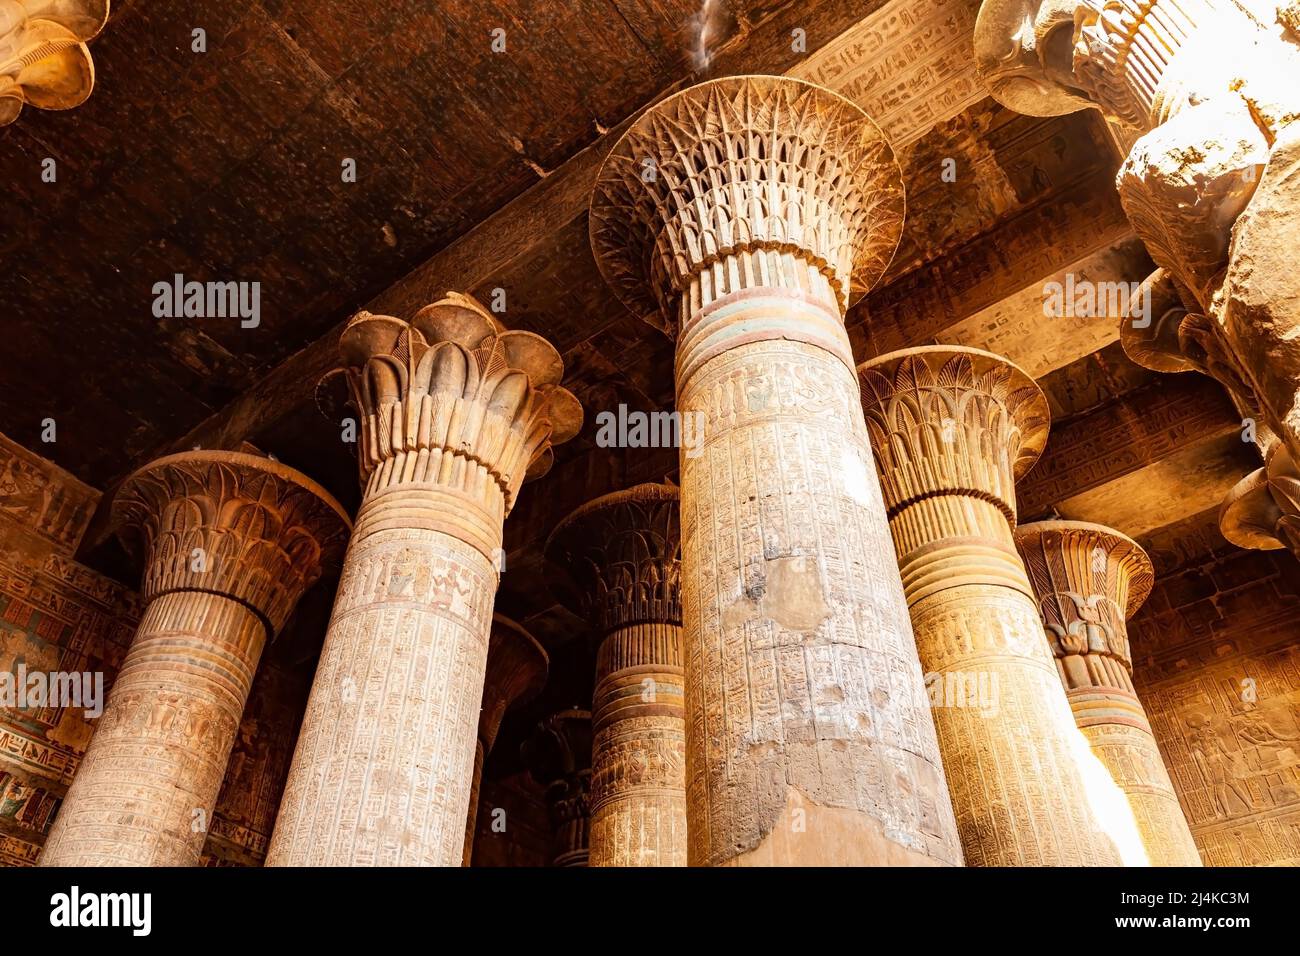 Beautiful decoration at the columns of the Temple of Khnum (the Ram Headed Egyptian God) in Esna, Upper Egypt. Stock Photo